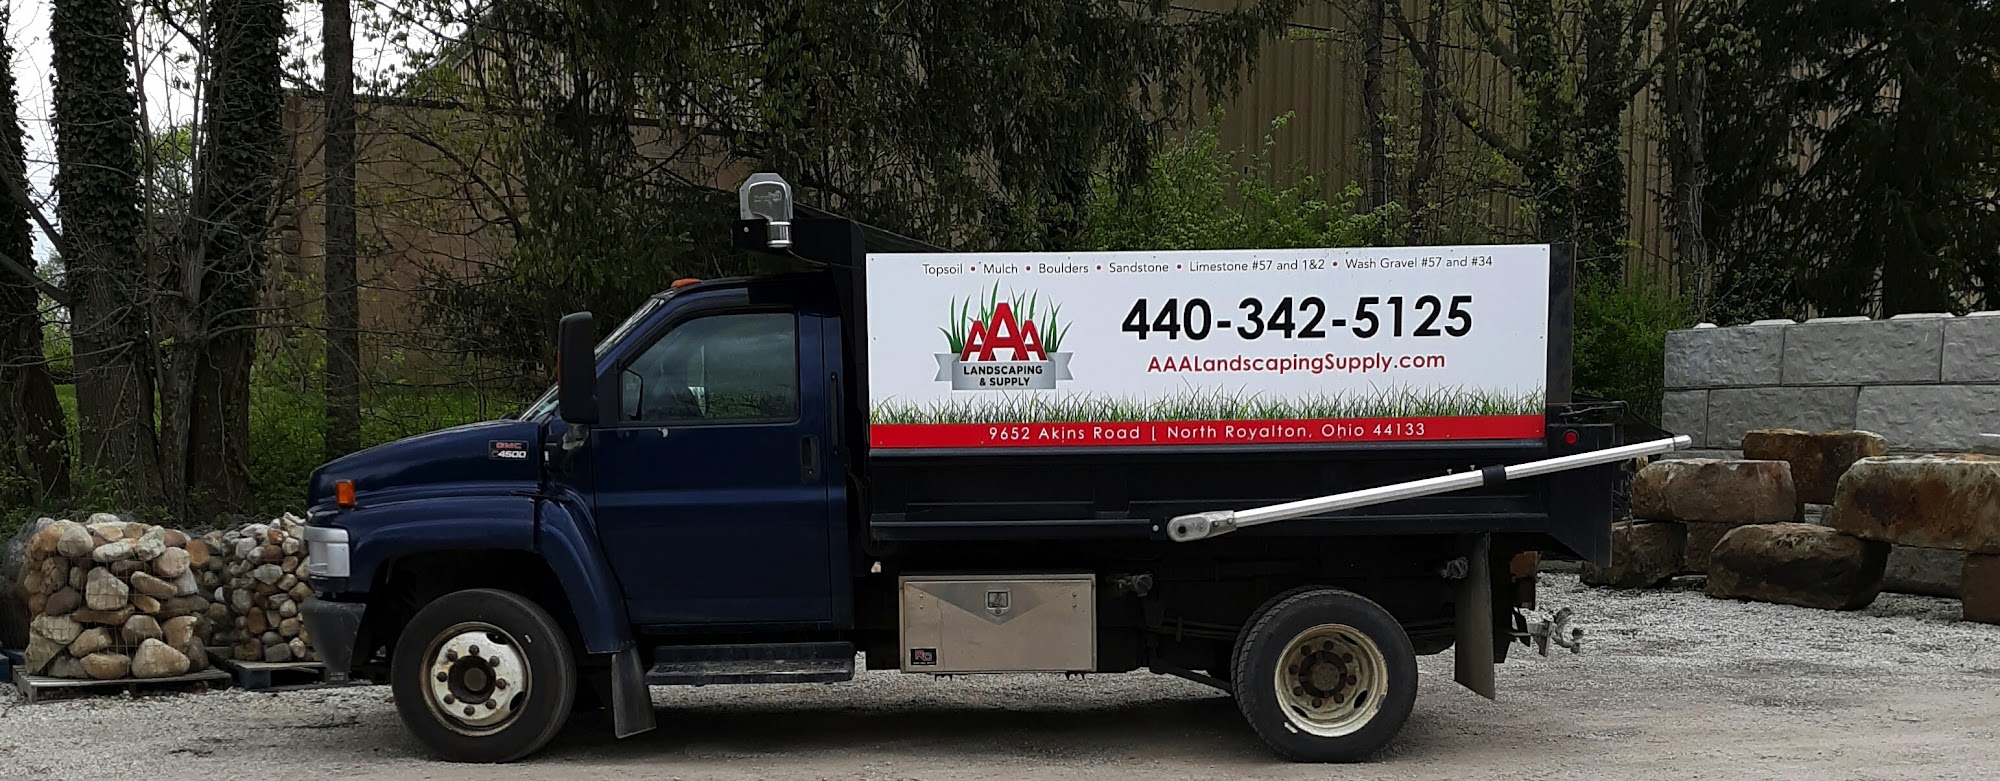 AAA Landscaping & Supply